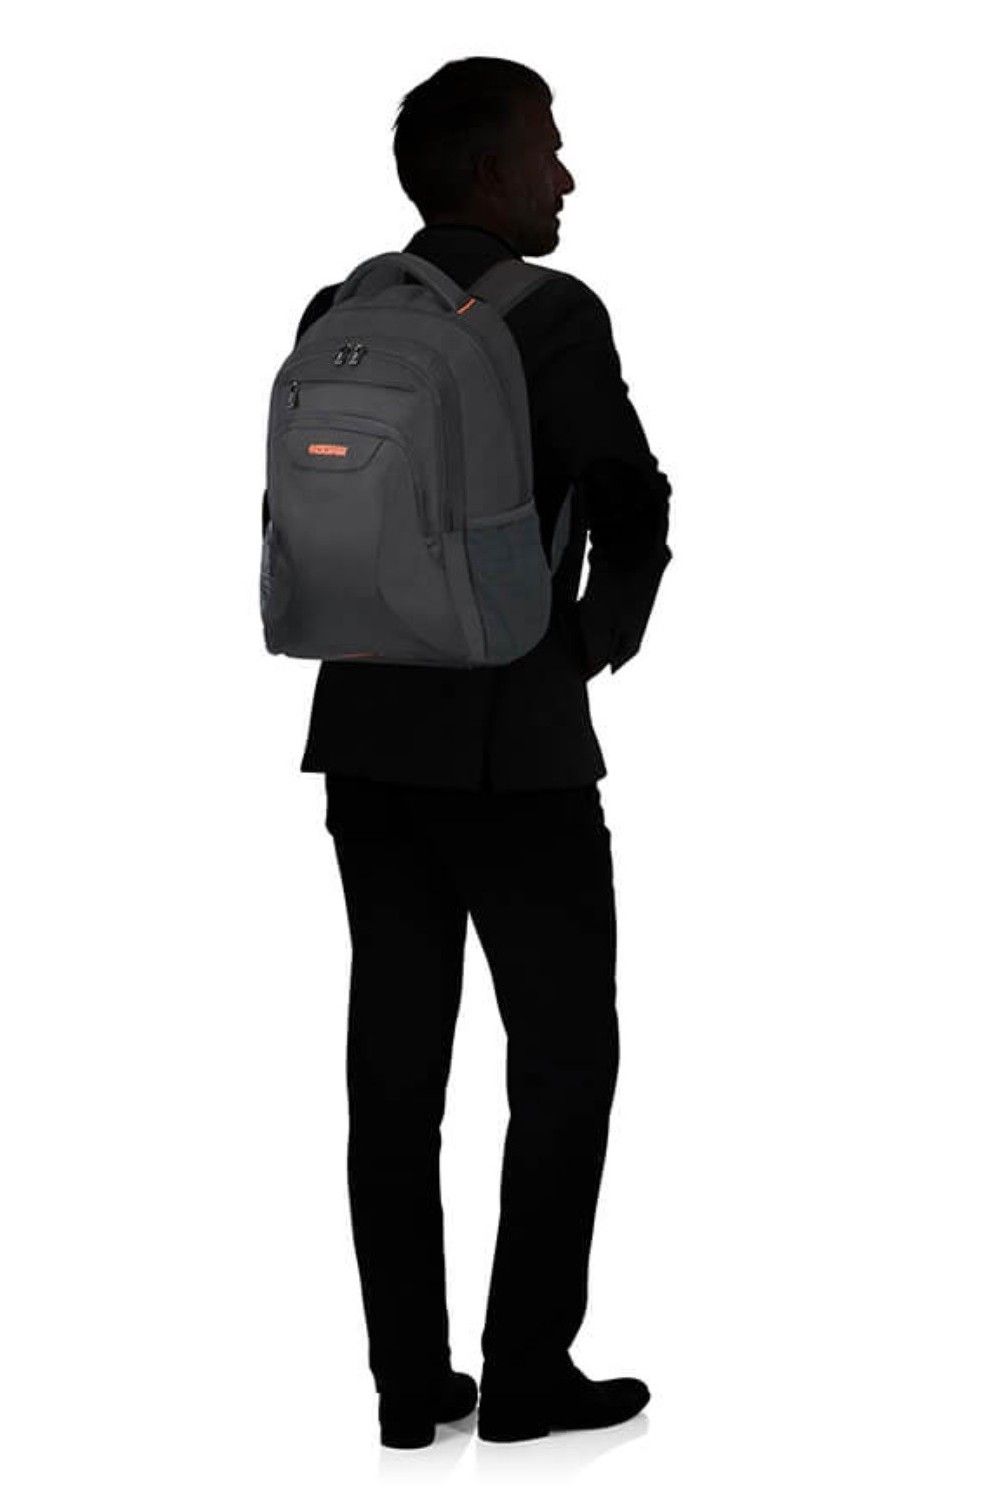 AT Laptop Backpack Work 17.3 inches